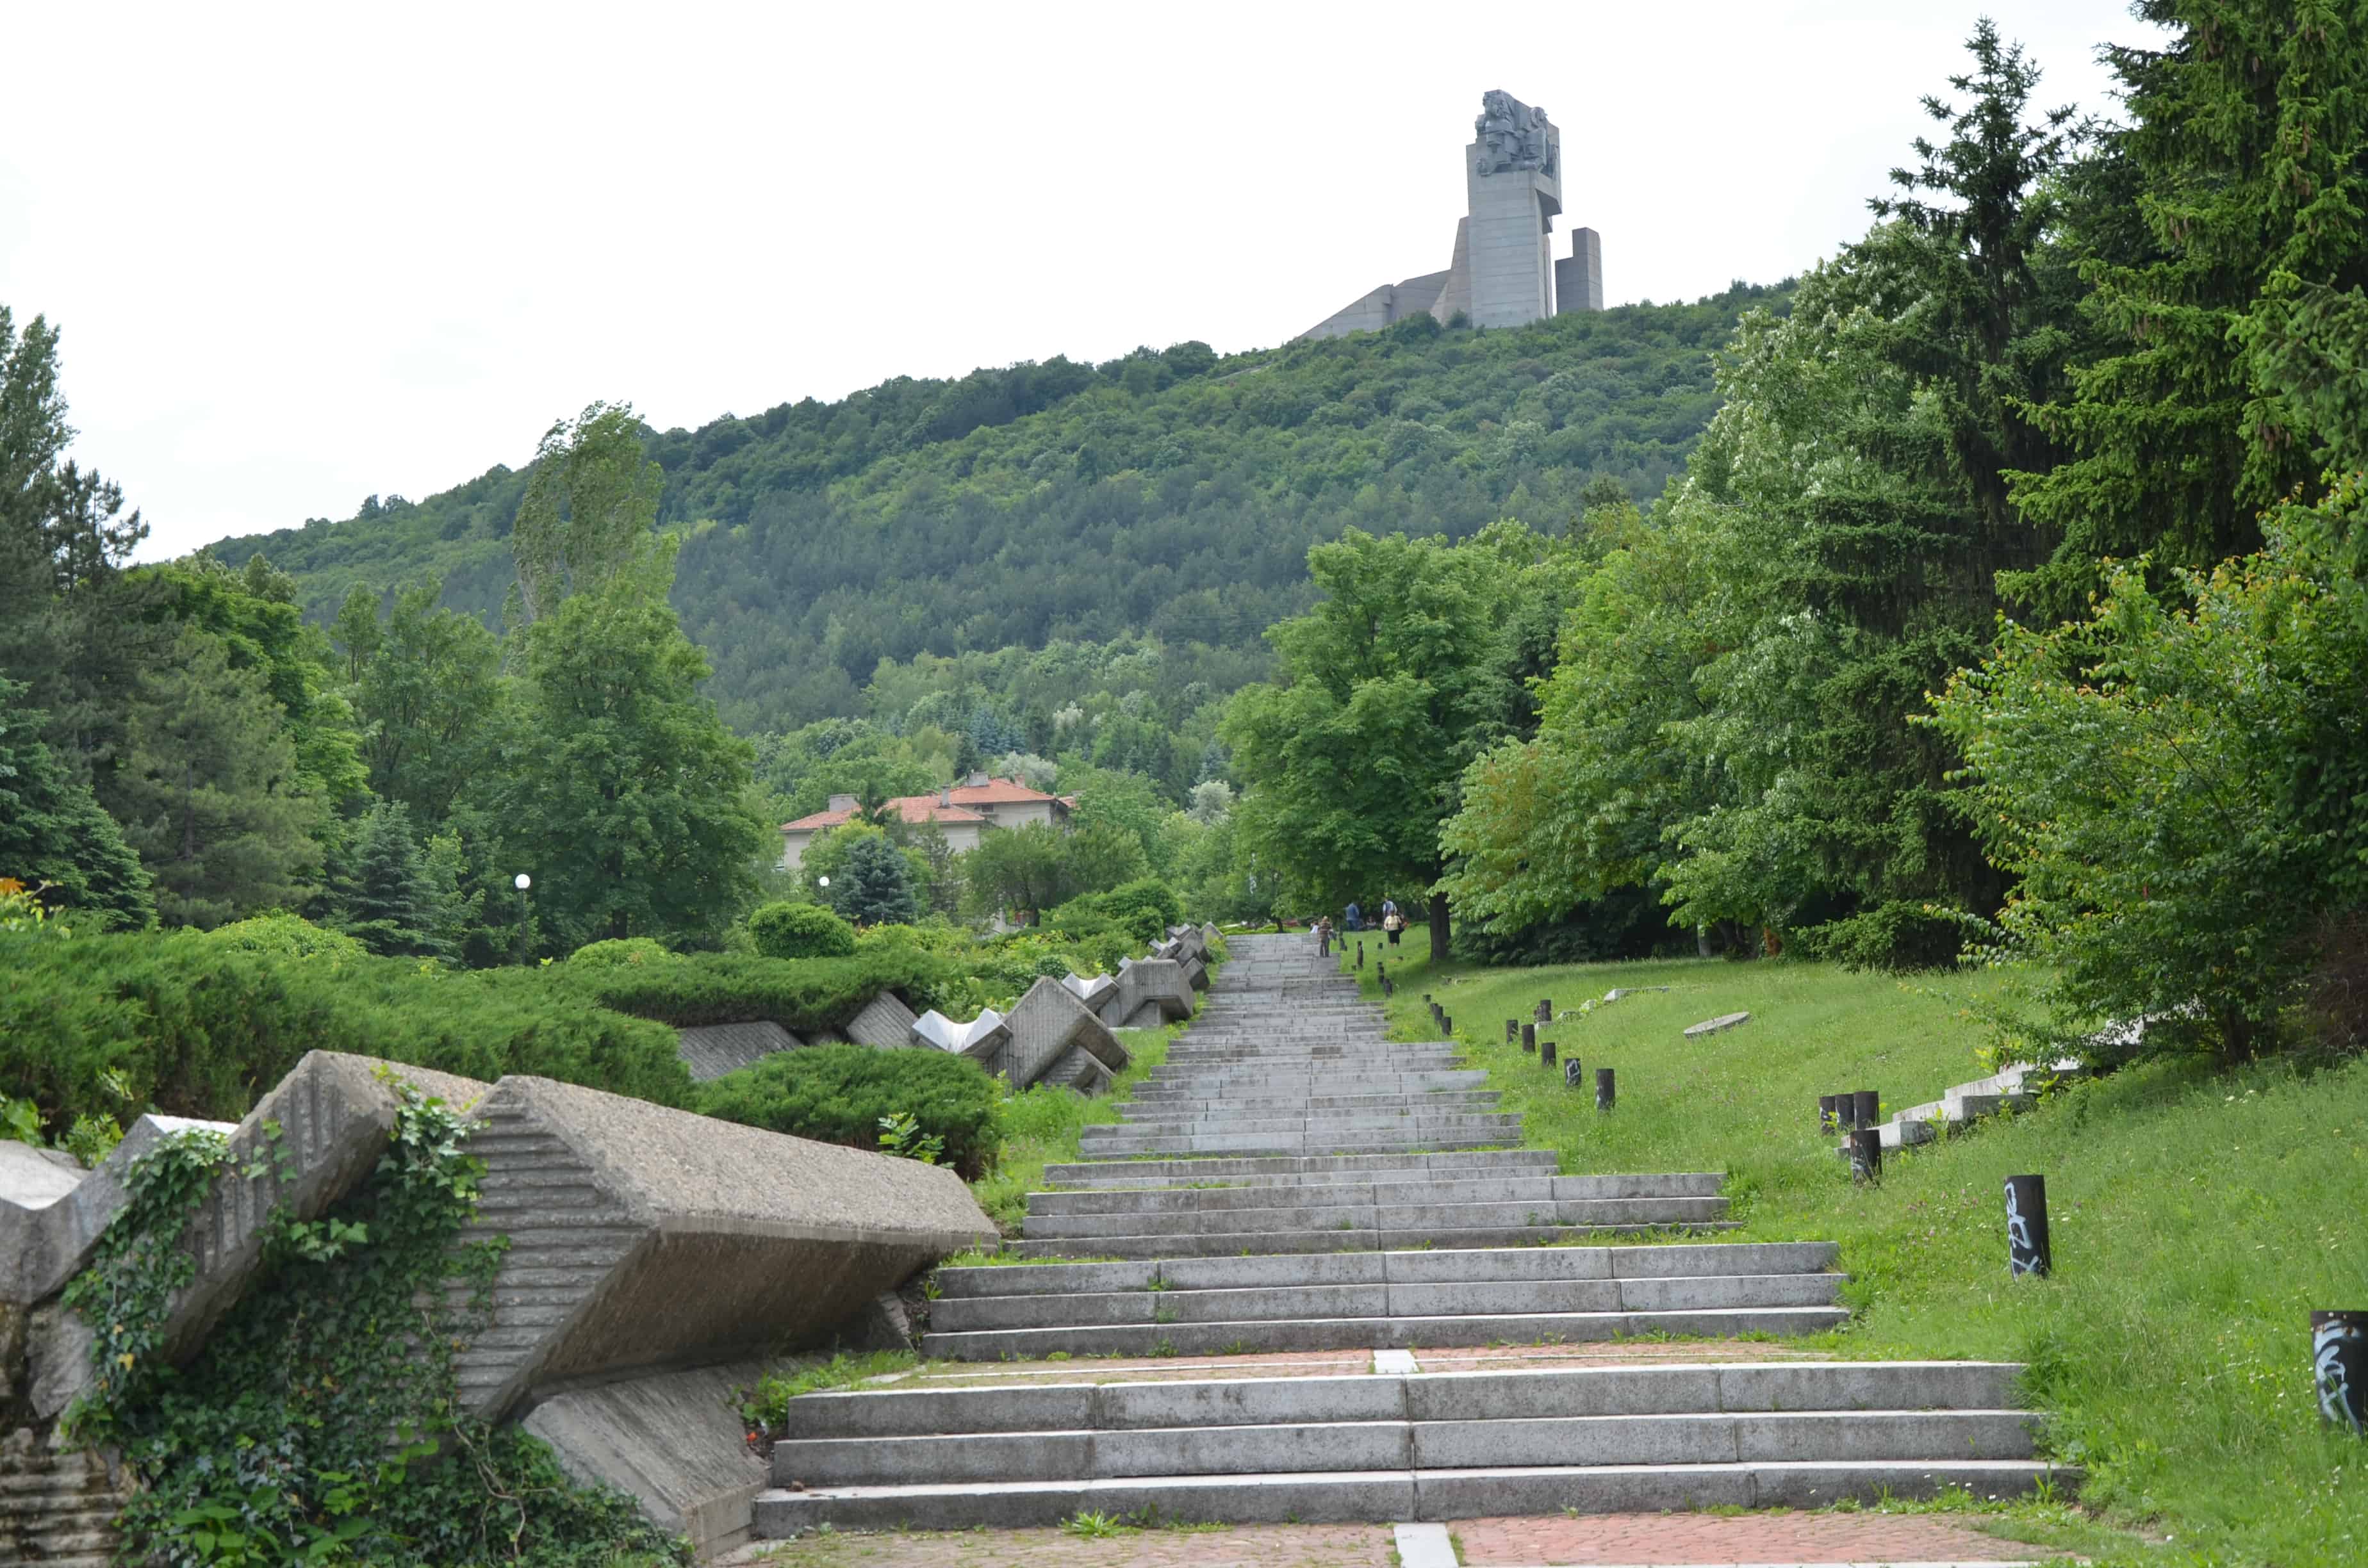 The steps up to the Founders of the Bulgarian State Monument in Shumen, Bulgaria